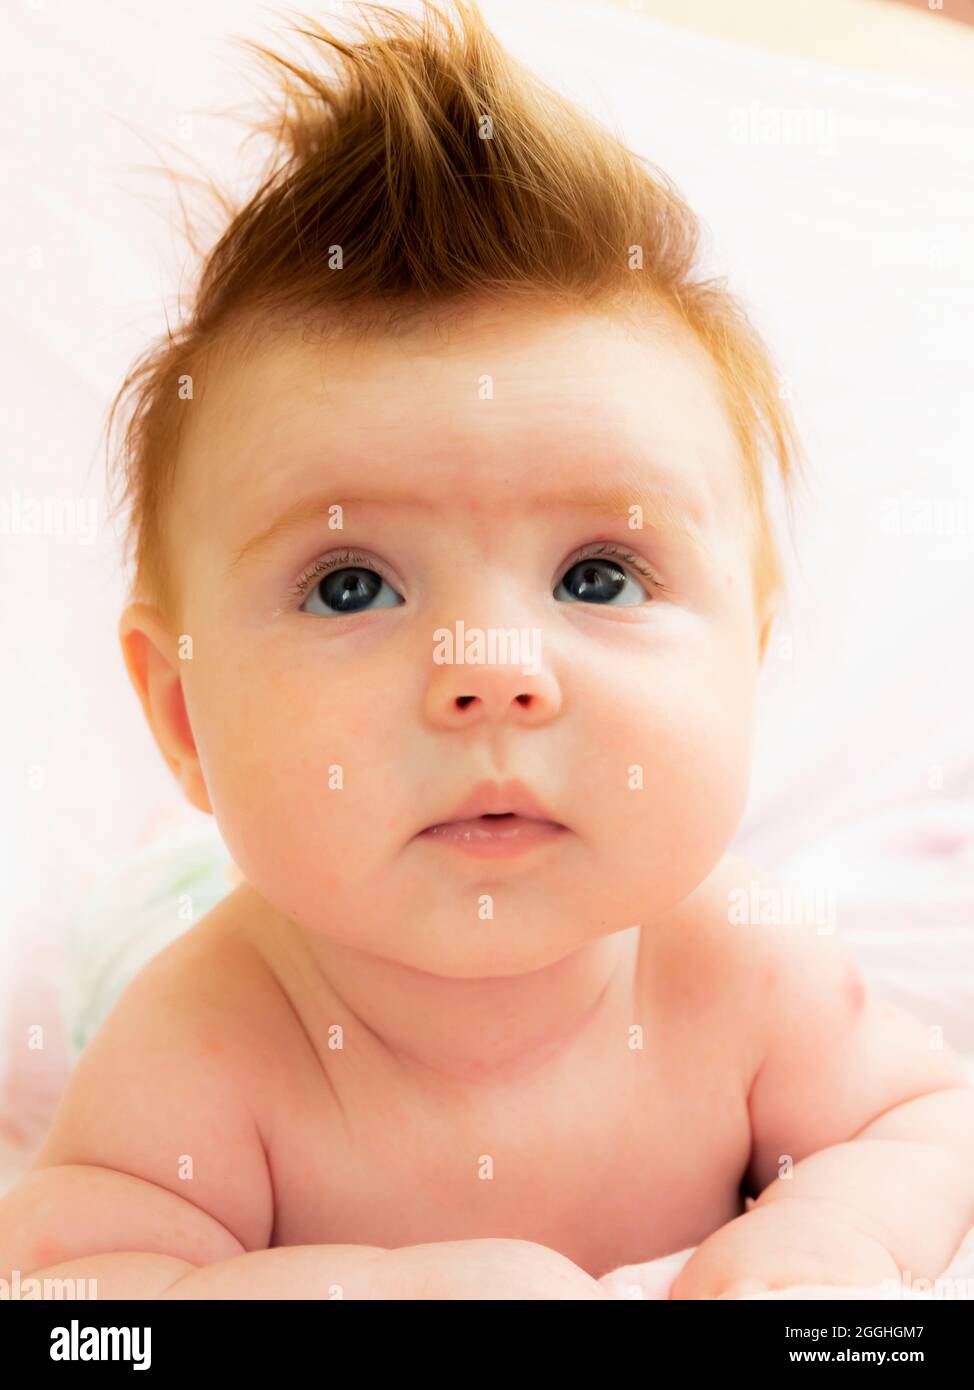 close-up portrait of five months old baby, lies on his stomach, head and eyes are raised up Stock Photo